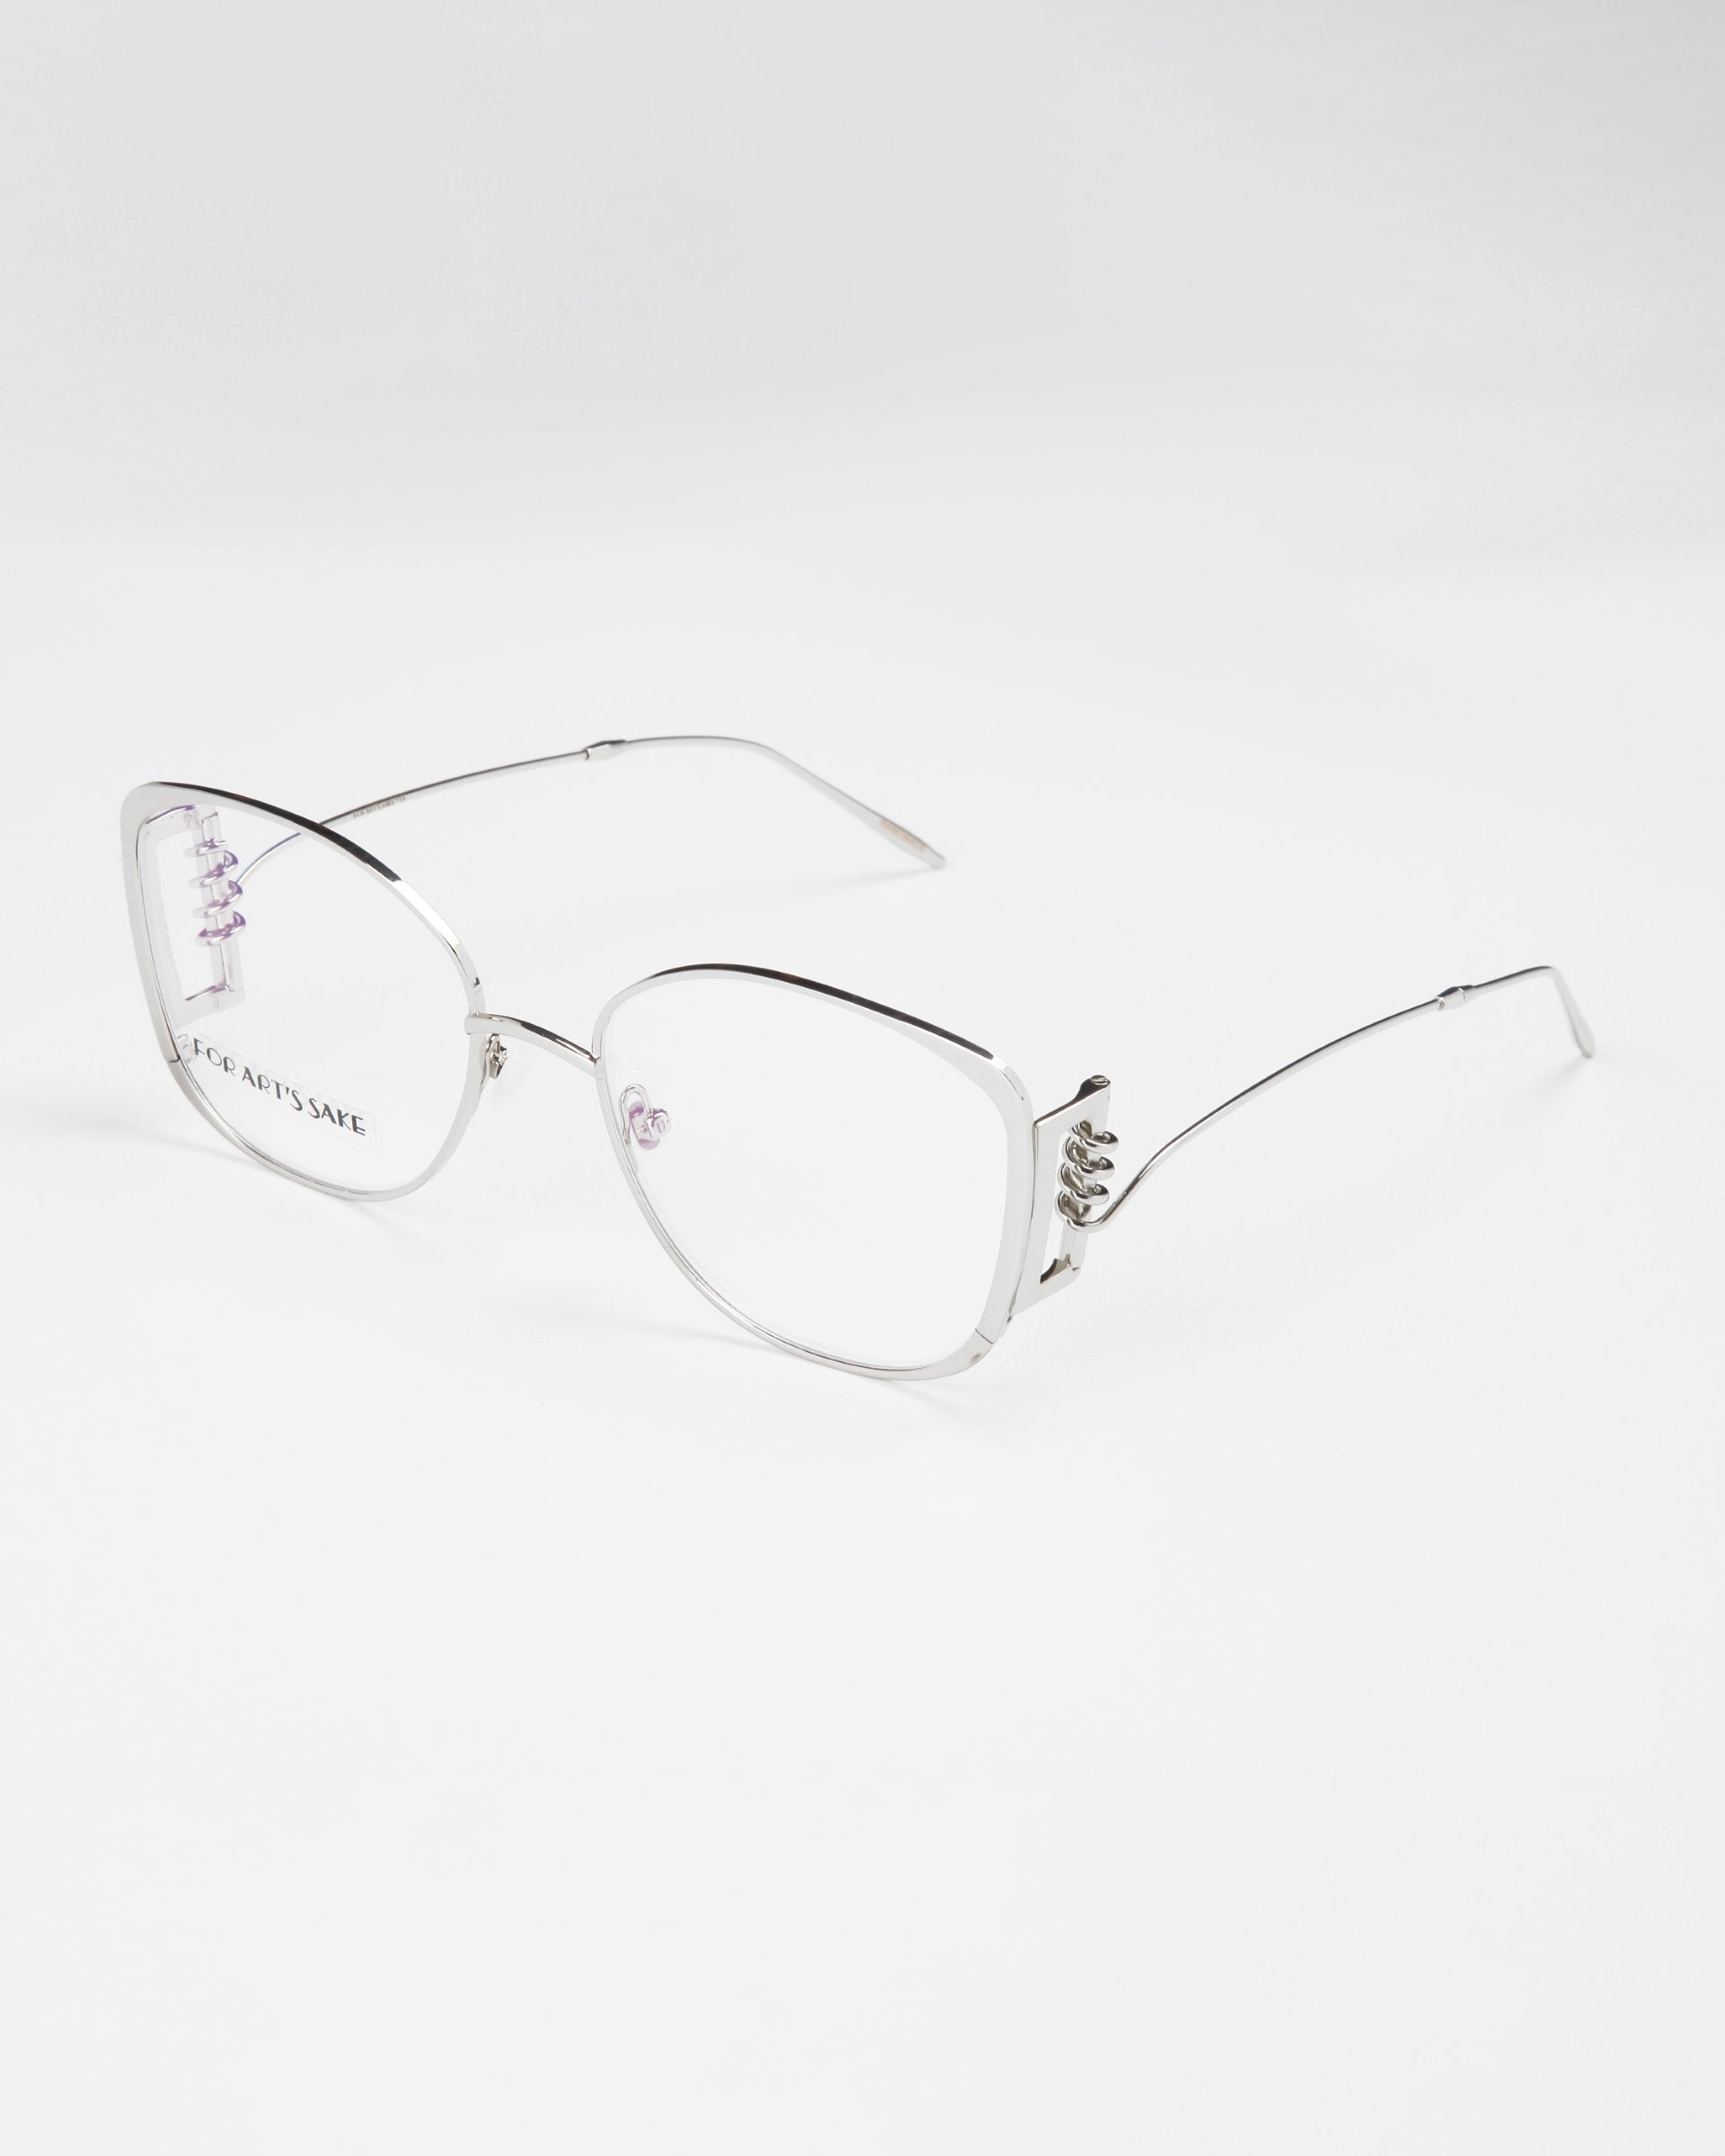 A pair of stylish, silver-framed Jupiter eyeglasses by For Art&#39;s Sake® with slightly oversized square lenses on a white background. The temples are thin and straight, with intricate decorative elements near the hinges. These chic glasses also feature a blue light filter for added comfort during screen time.